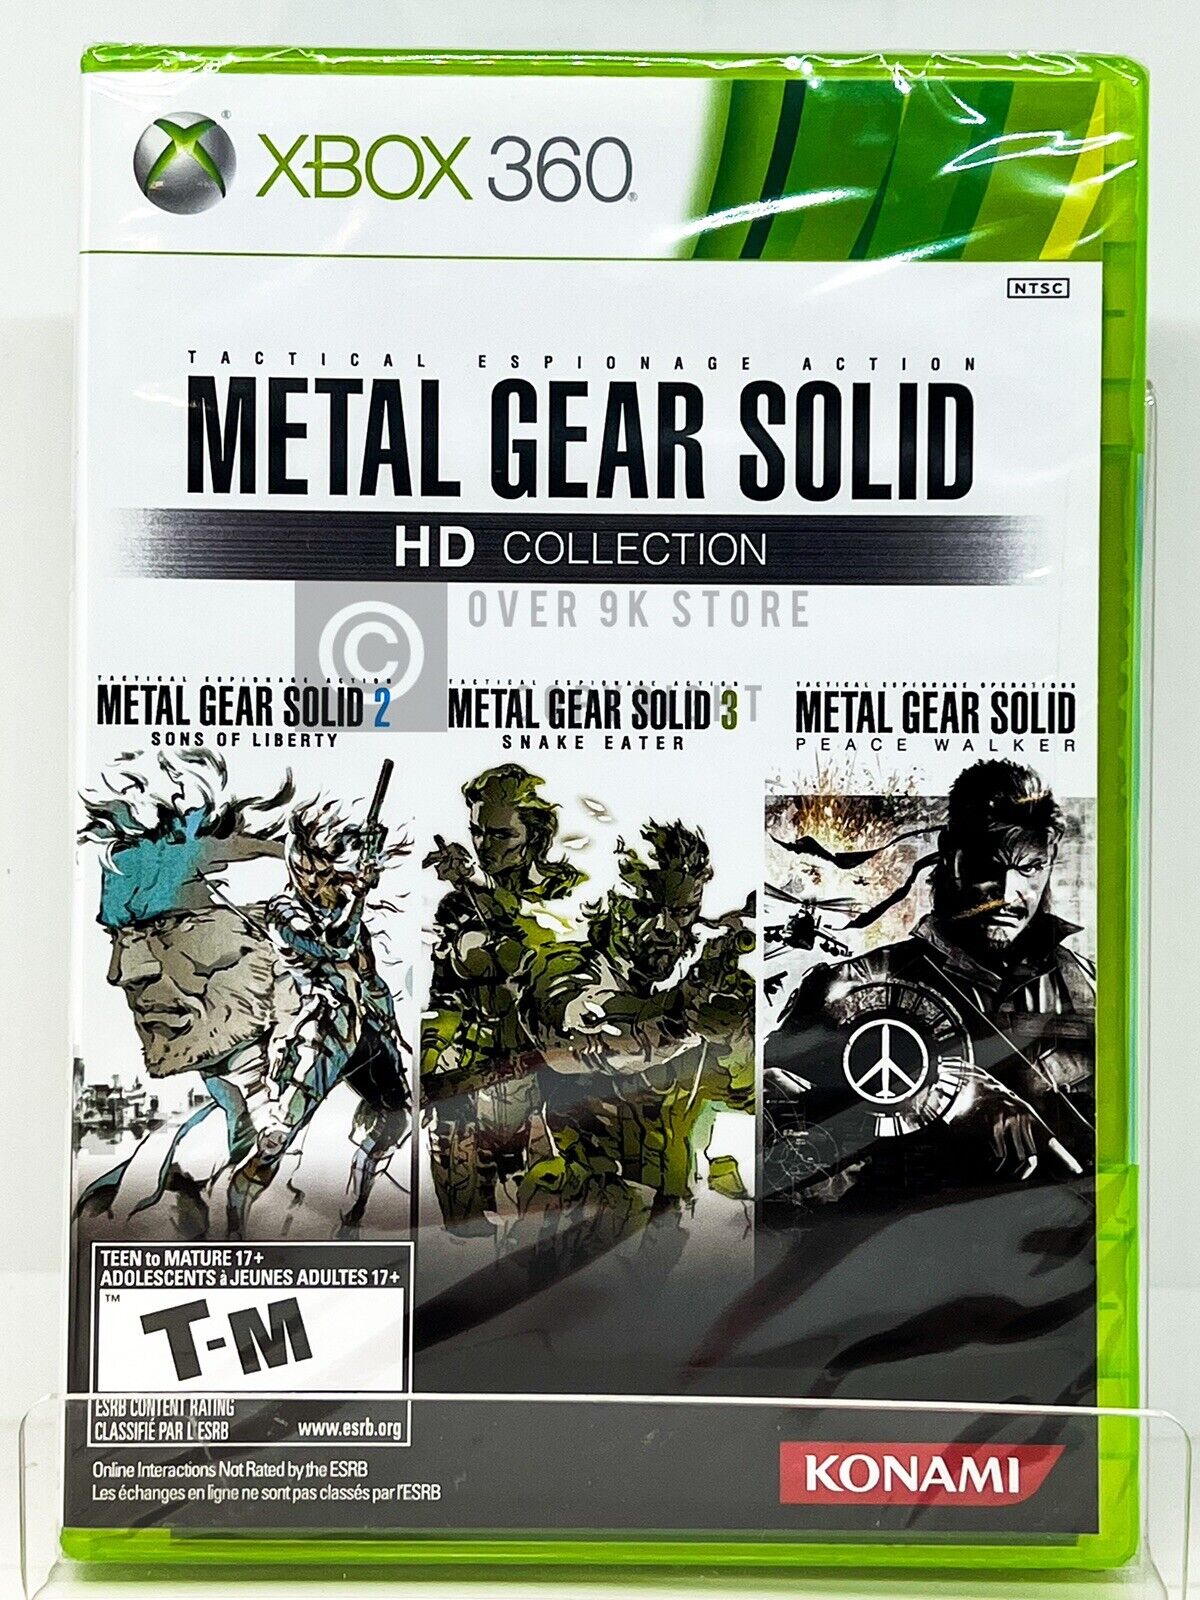 Metal Gear Solid Collection - Xbox 360 - Brand New Sealed 83717301325 | eBay